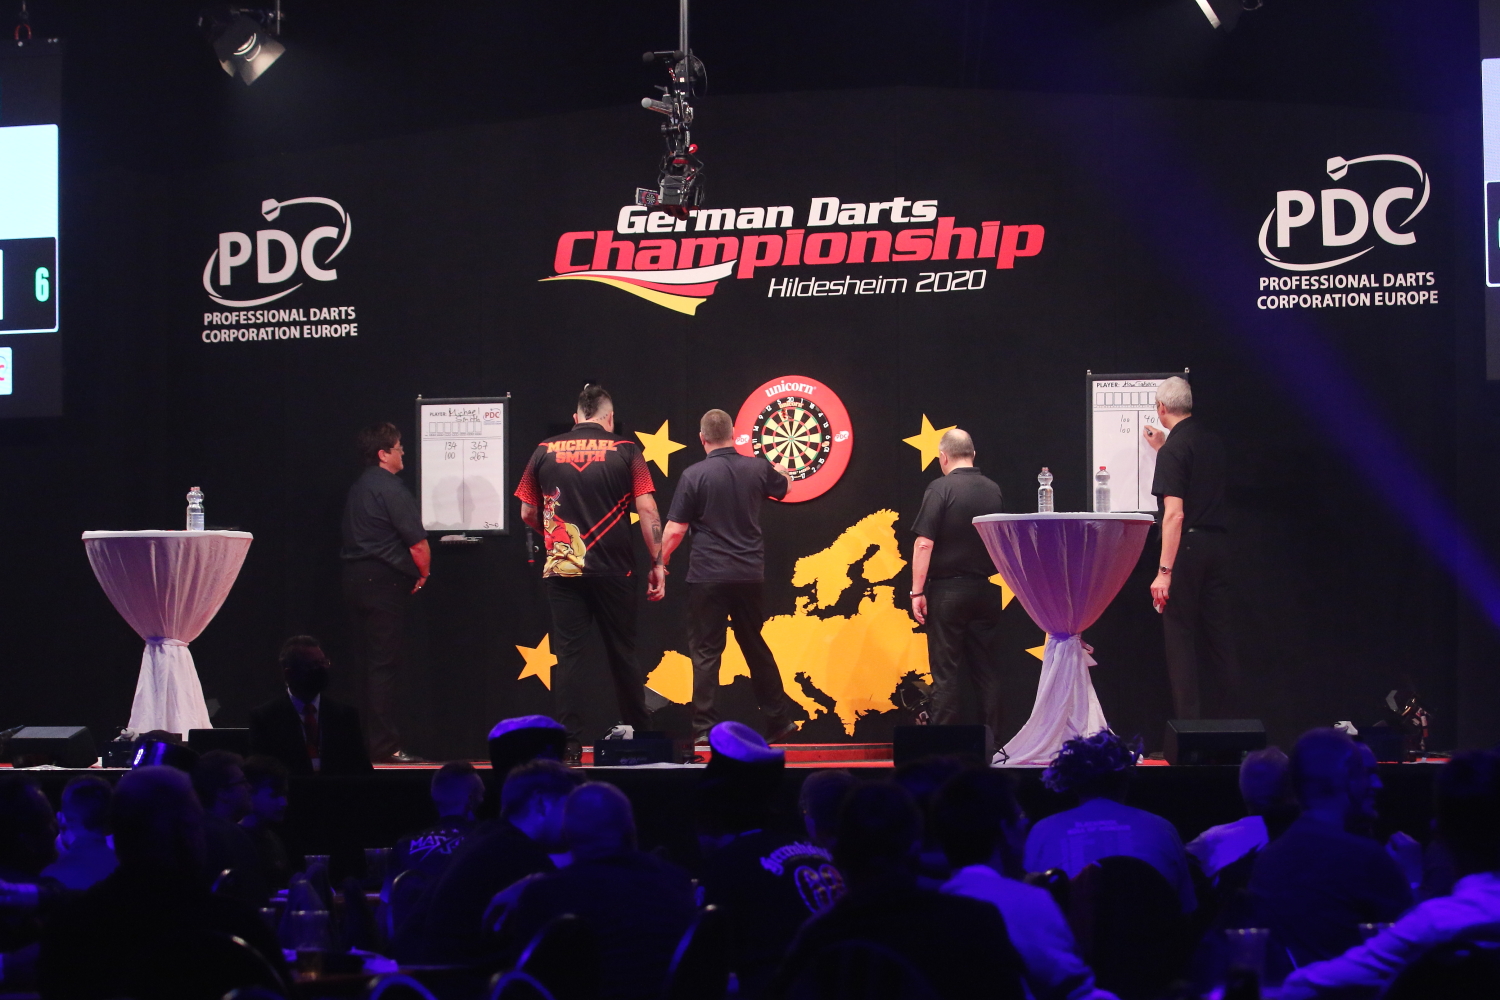 German Darts Championship Day 2 Schedule and how to watch